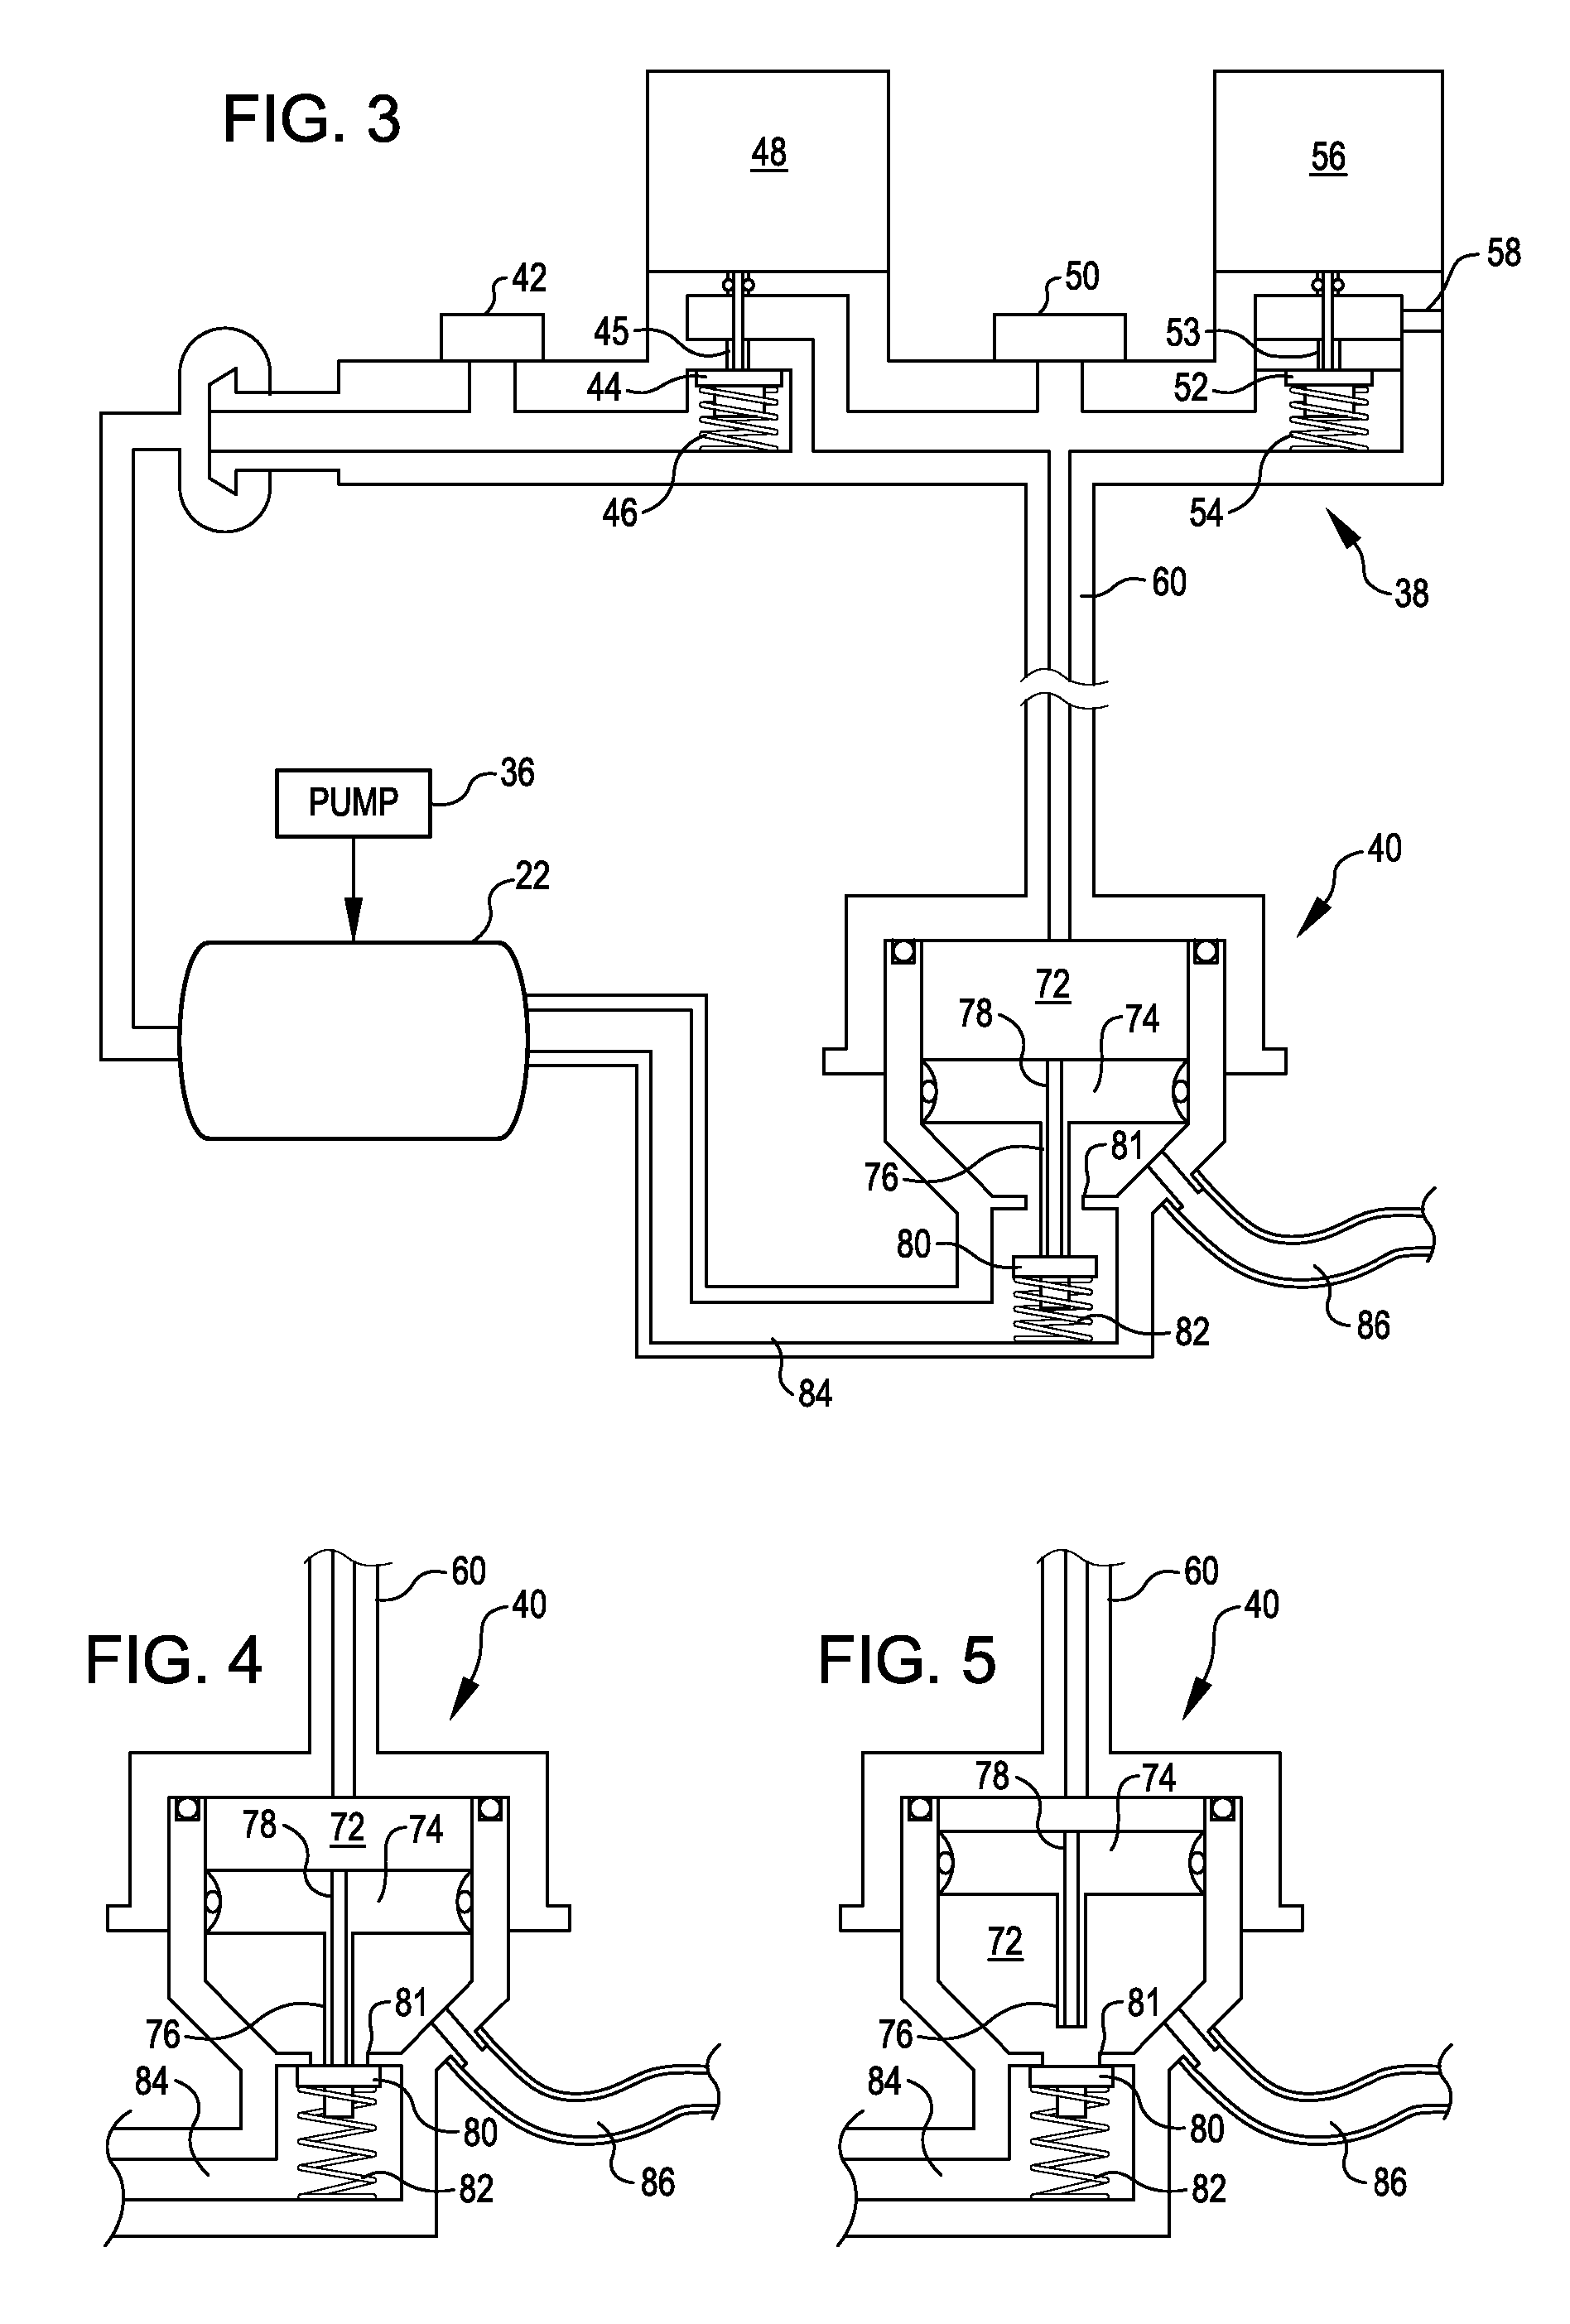 Air compressor having a pneumatic controller for controlling output air pressure